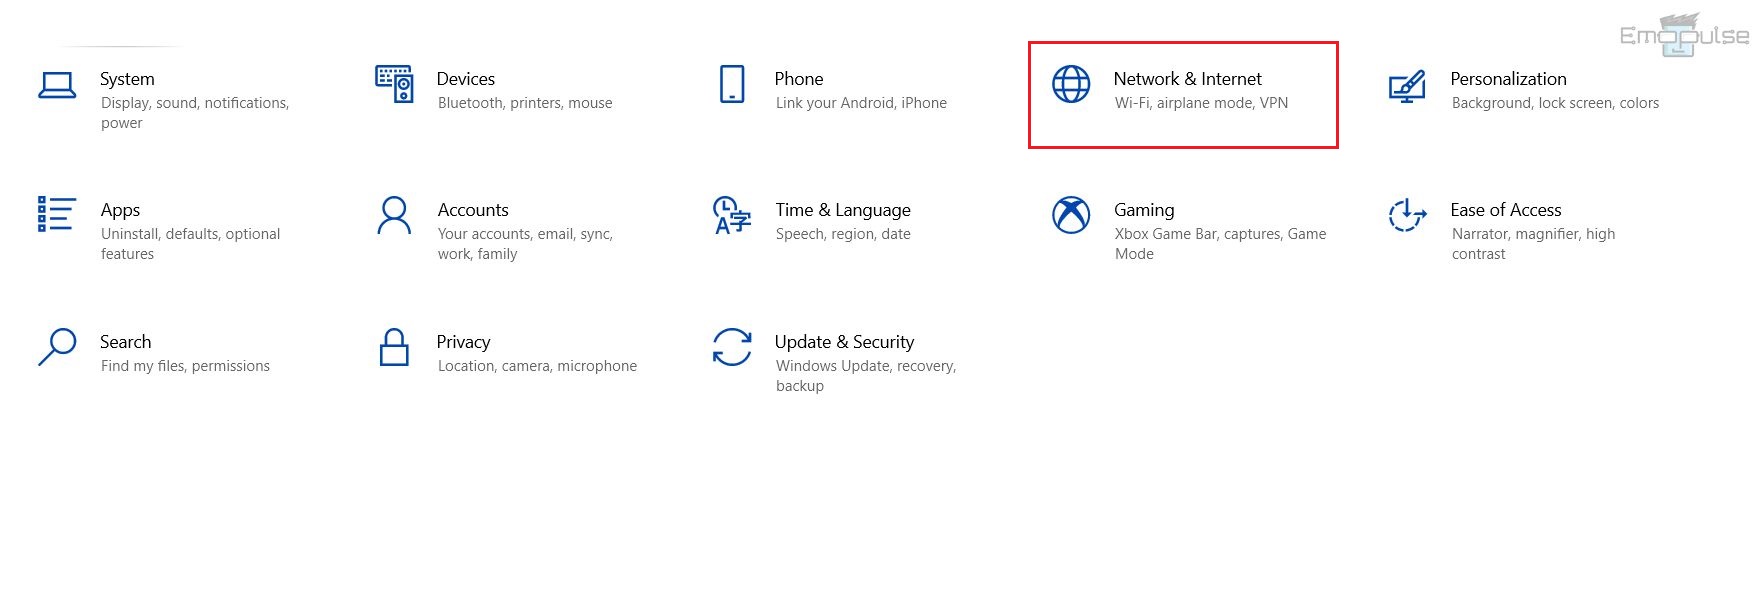 network and internet settings windows